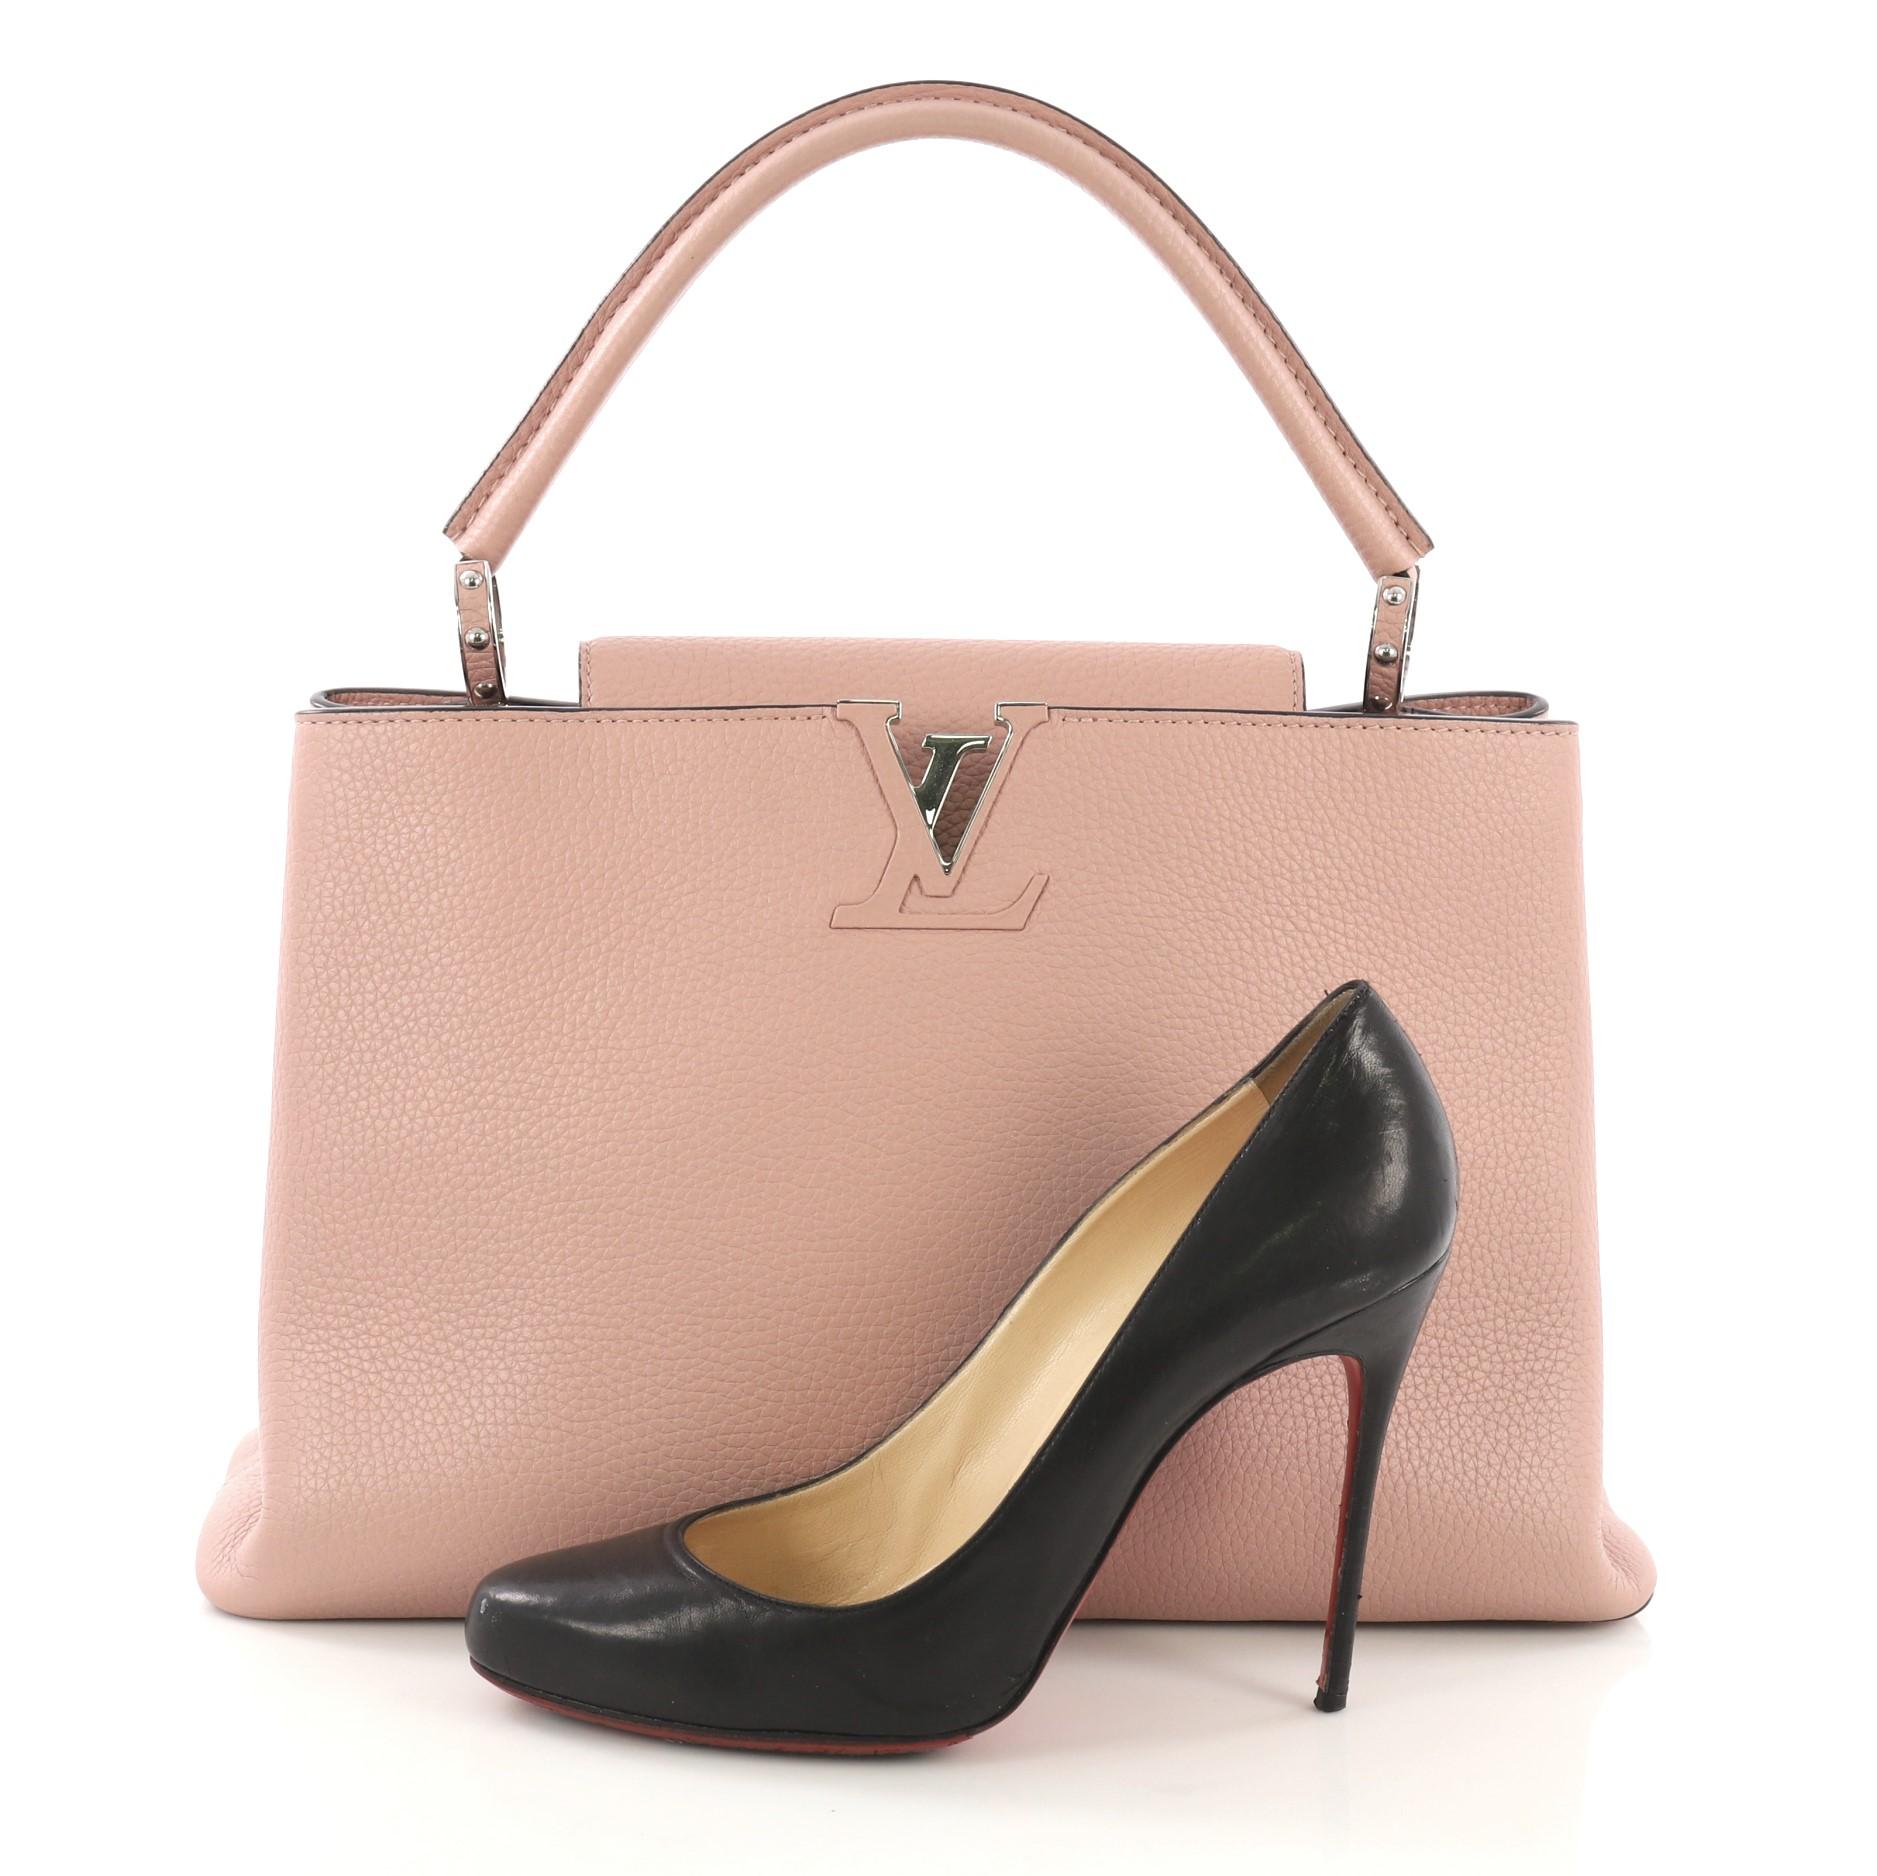 This Louis Vuitton Capucines Handbag Leather MM, crafted in pink leather, features a single loop leather handle secured by jewel-like rings, frontal flap, and silver-tone hardware. Its flap can be tucked inside to reveal the brand's logo and opens